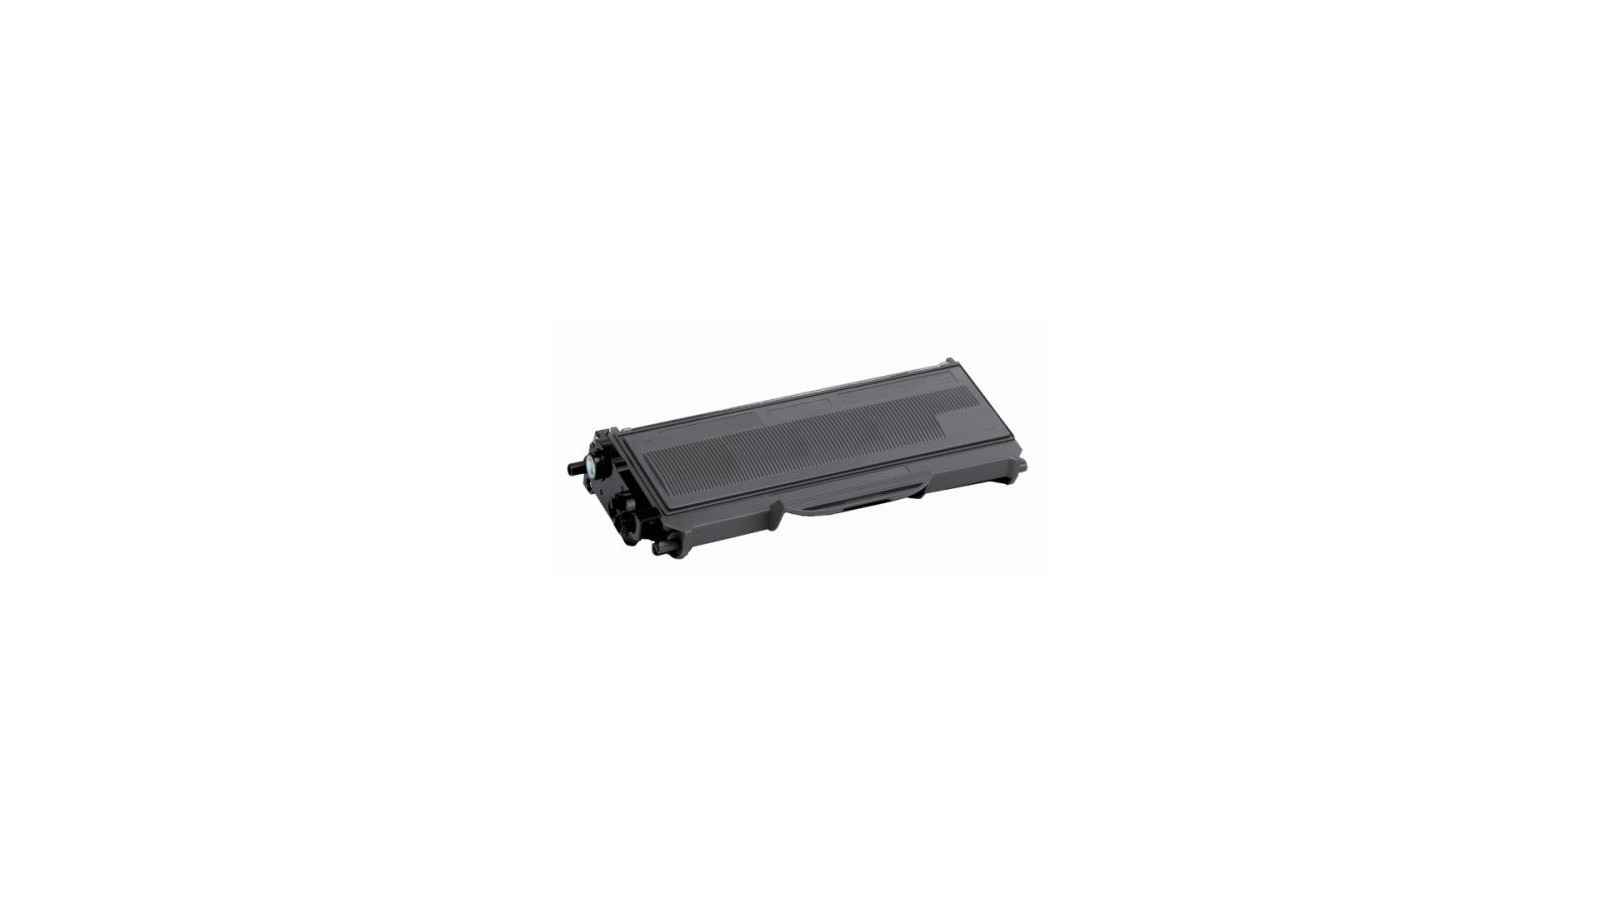 Toner per Brother DCP-7030 DCP-7040 DCP-7045 DCP-7045N Black 2600 pagine